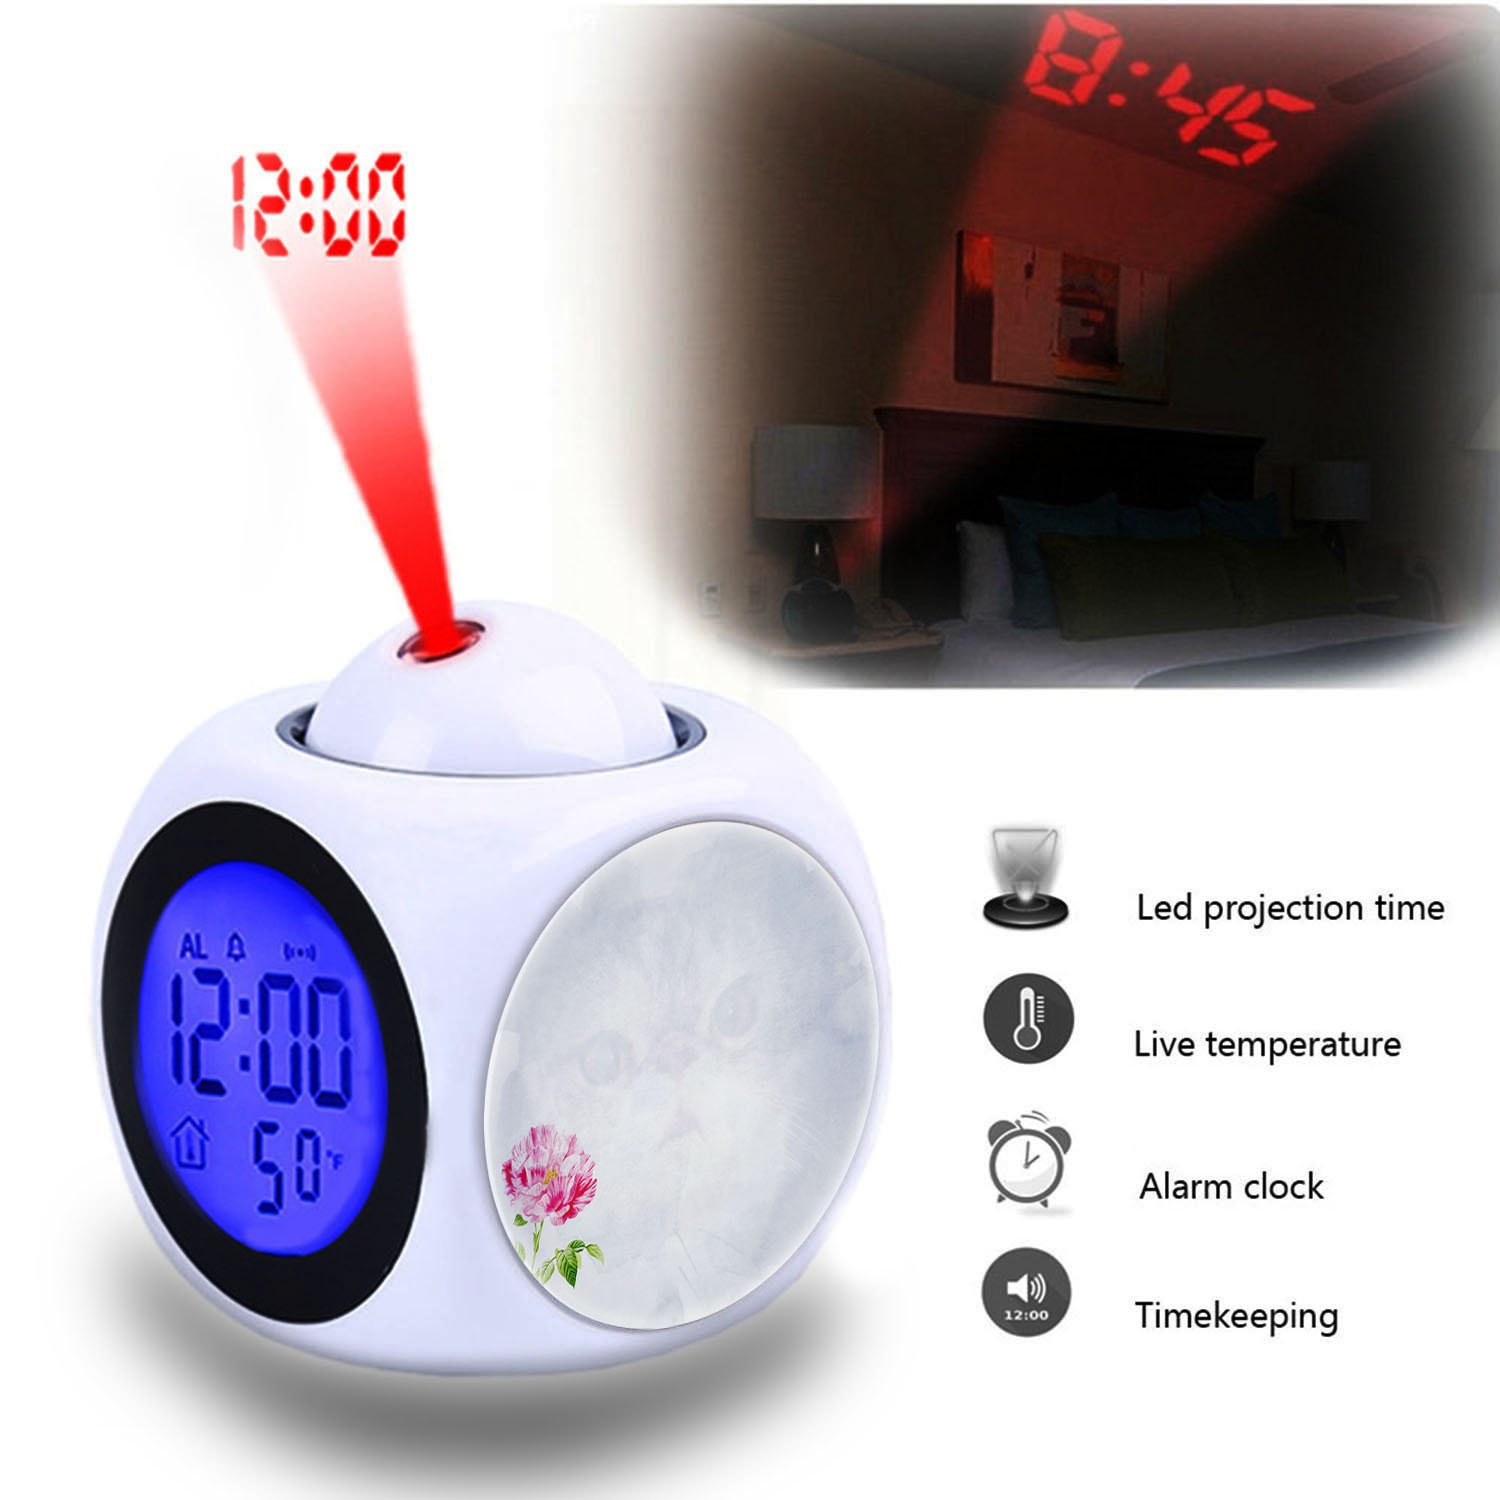 Projection Alarm Clock Wake Up Bedroom With Data And - Fantasy Alarm Clock , HD Wallpaper & Backgrounds